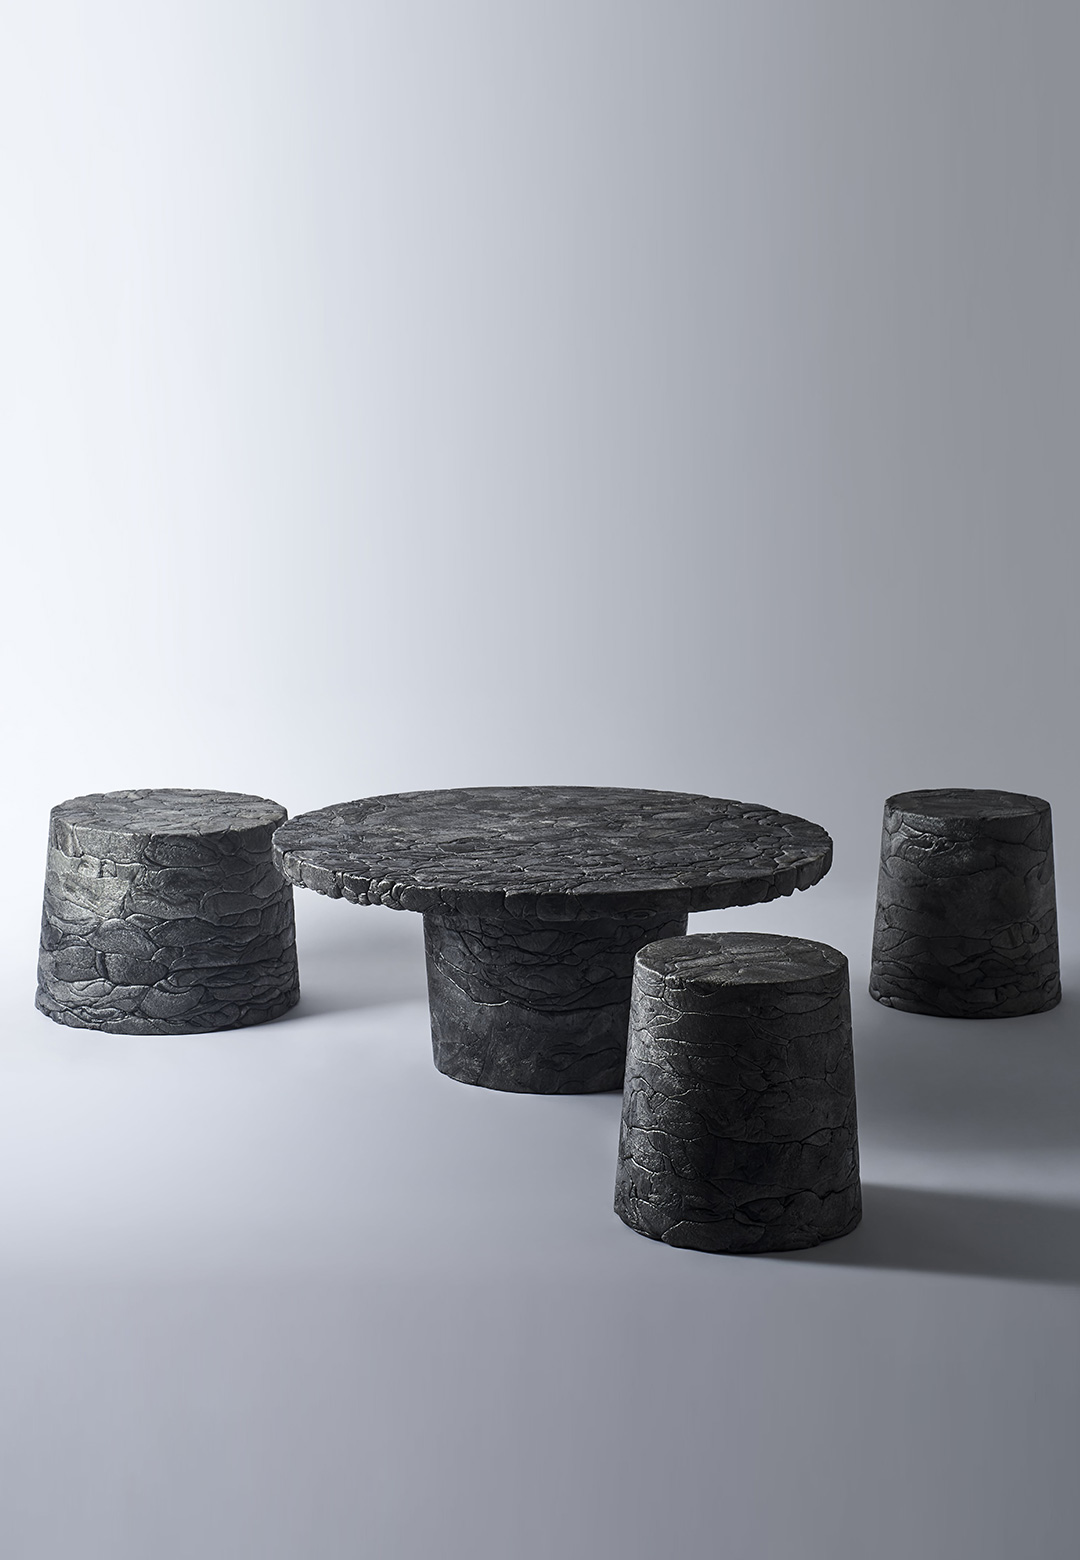 The ‘Refoam’ series by we+ features furniture crafted with recycled Styrofoam